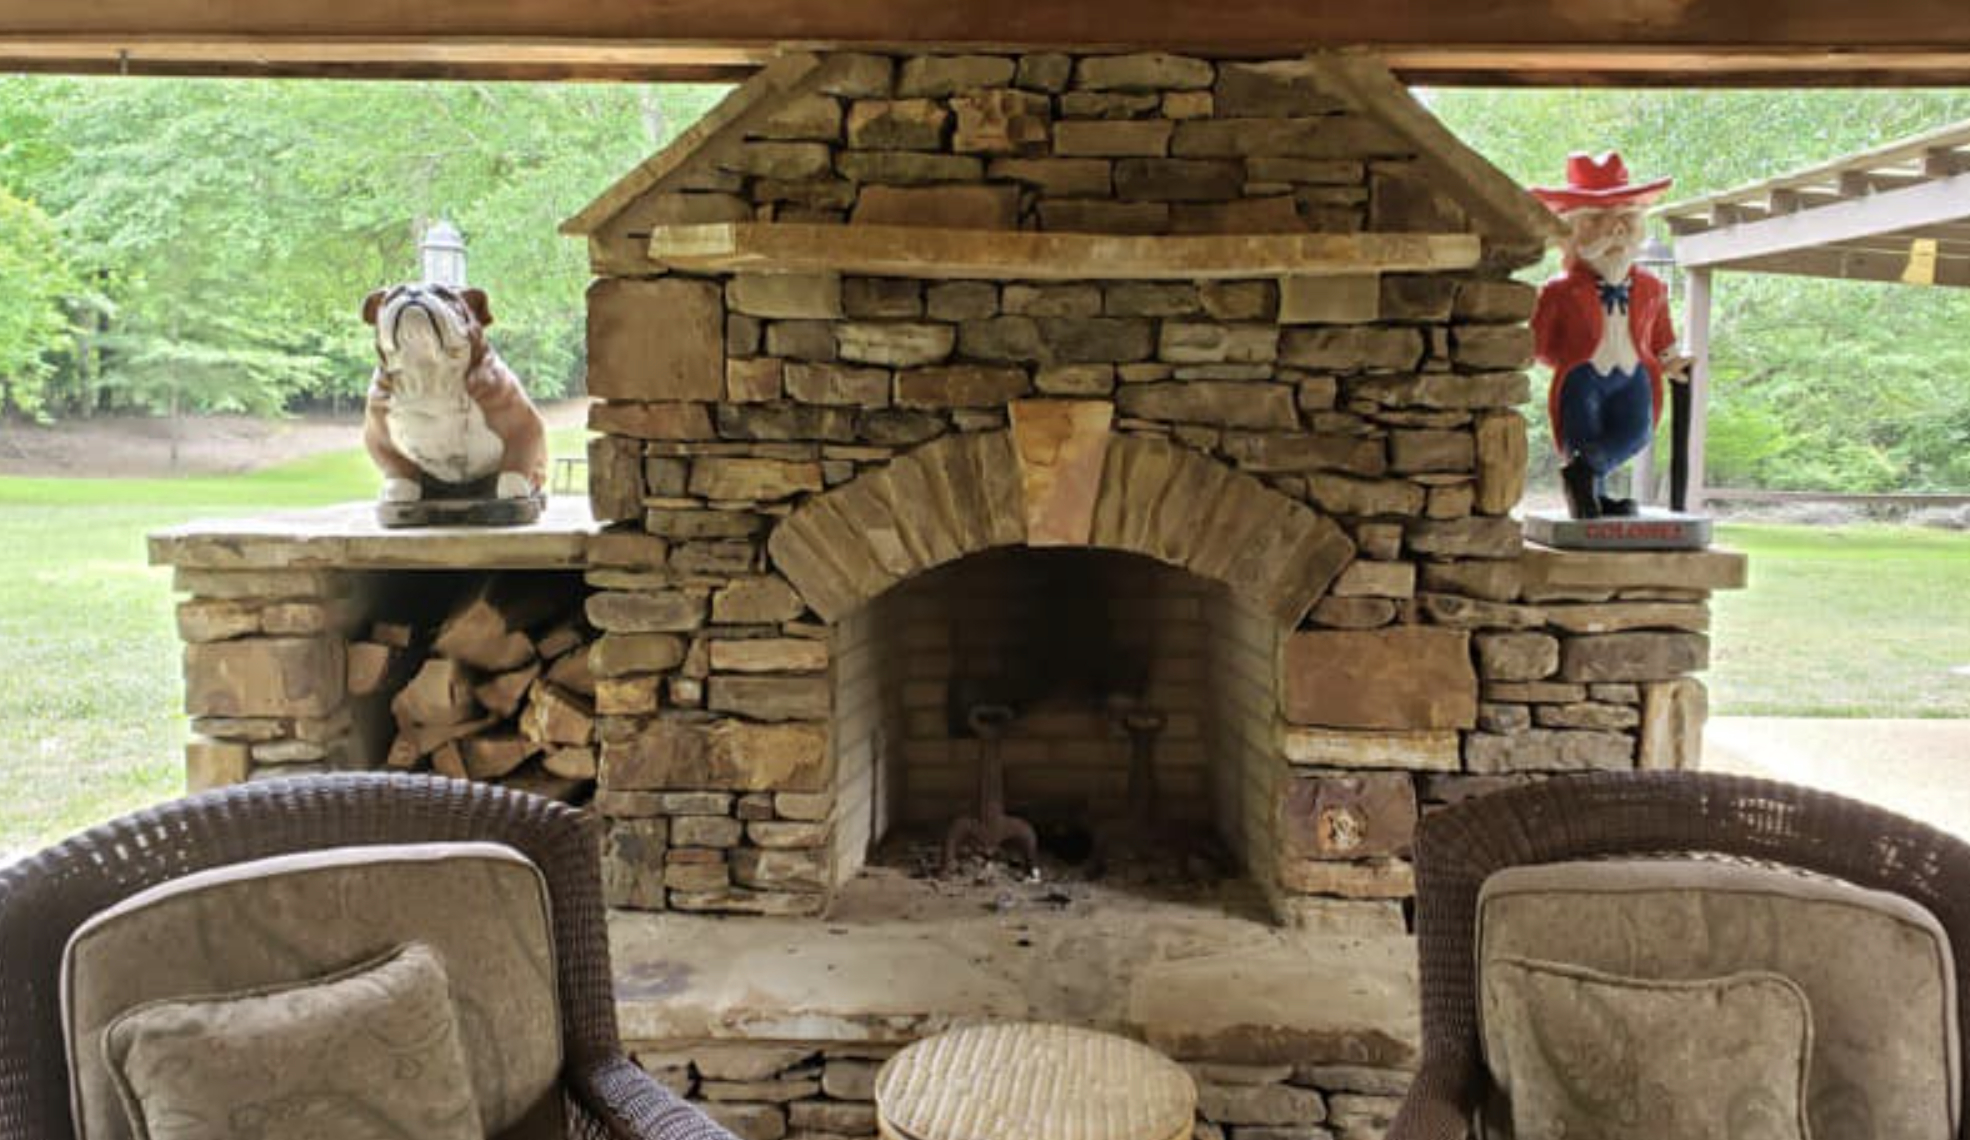 this image shows fireplace in Brentwood, California